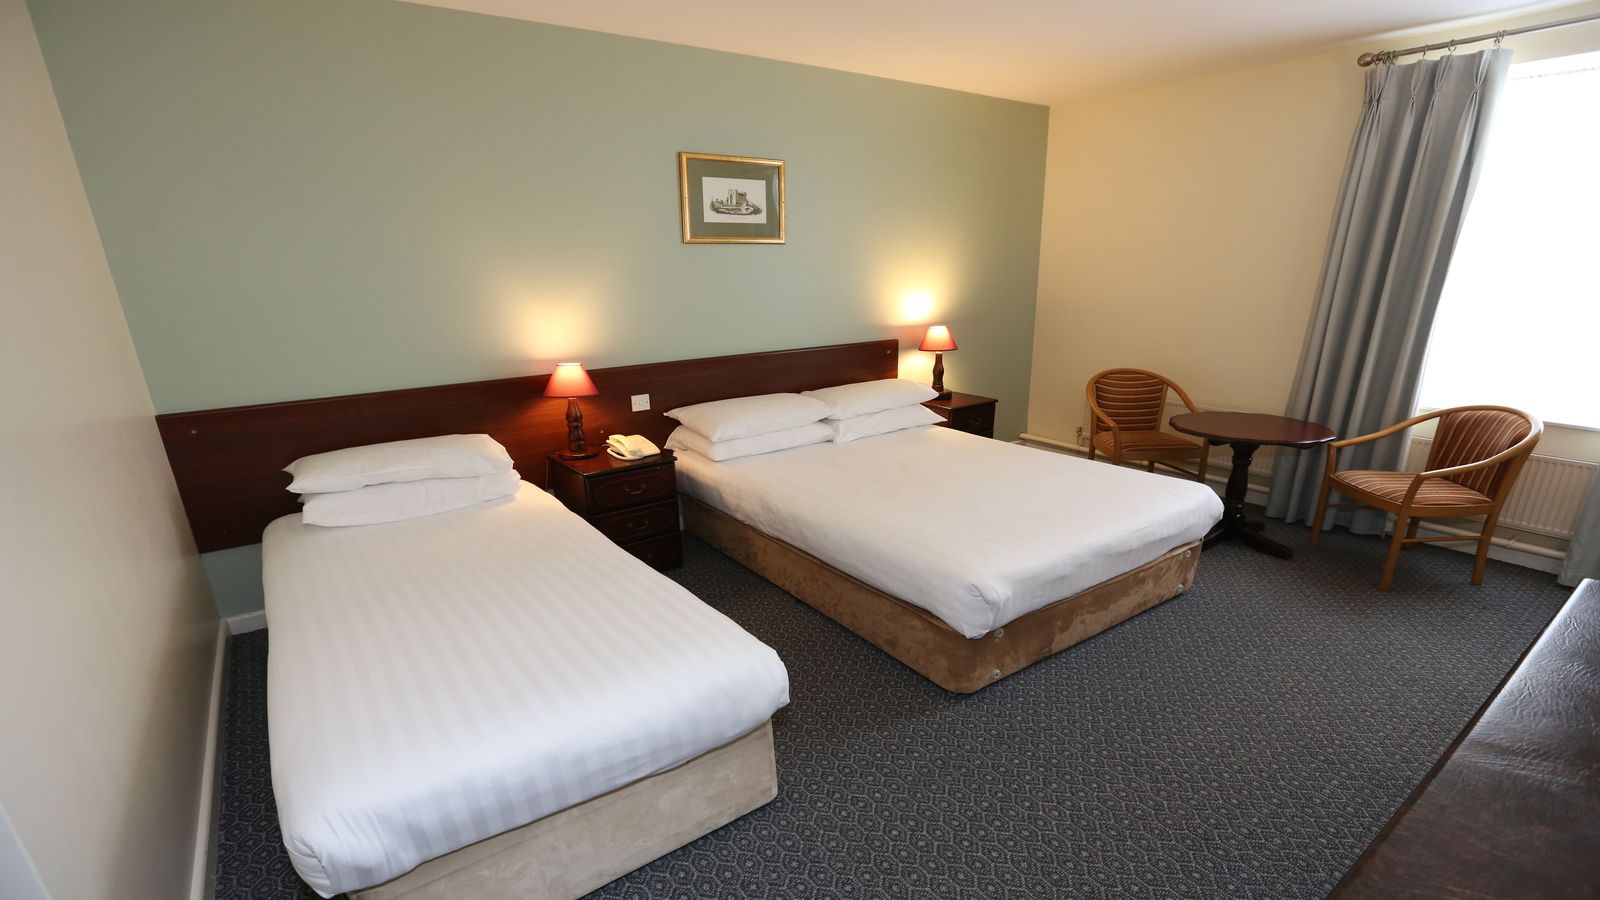 Double or Twin Room at the Auburn Lodge